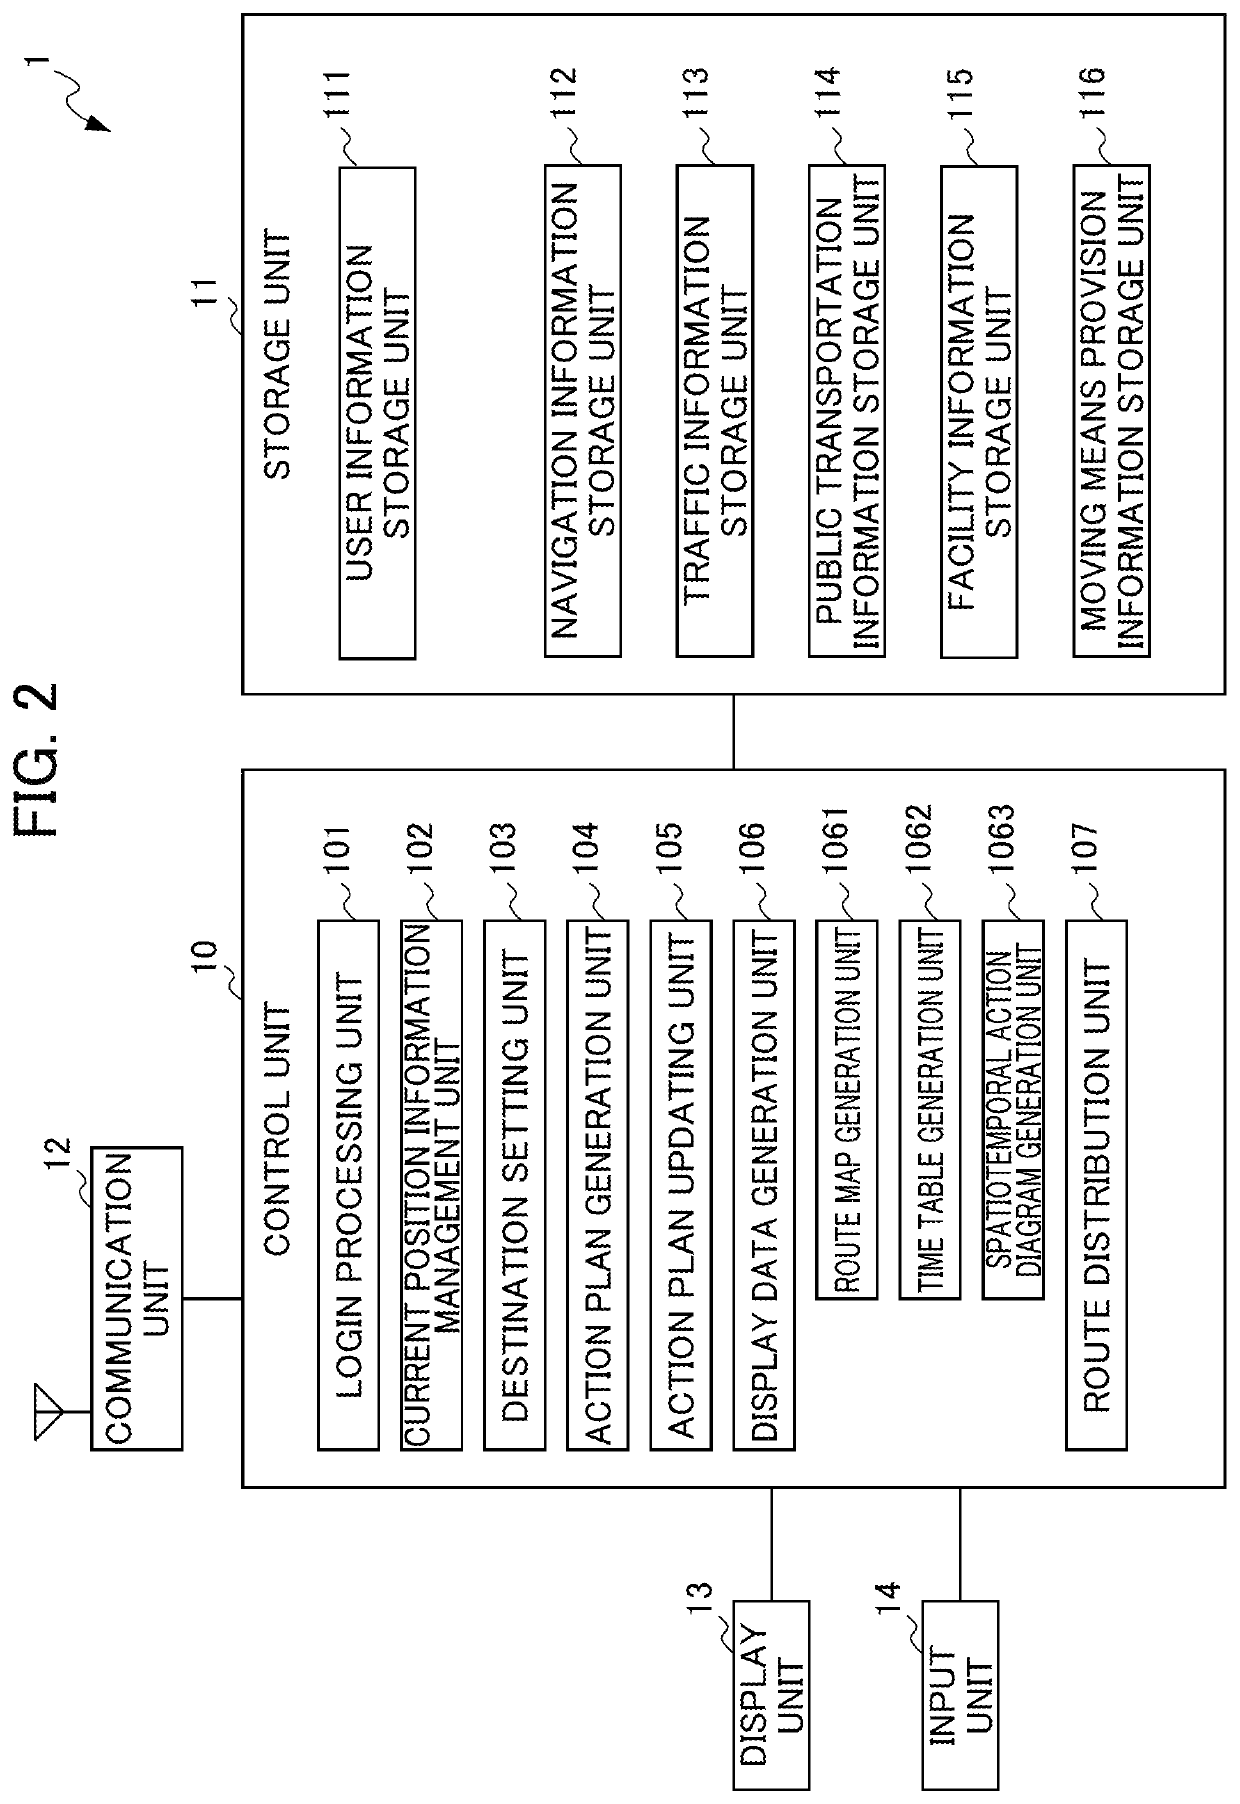 Action planning and execution support device